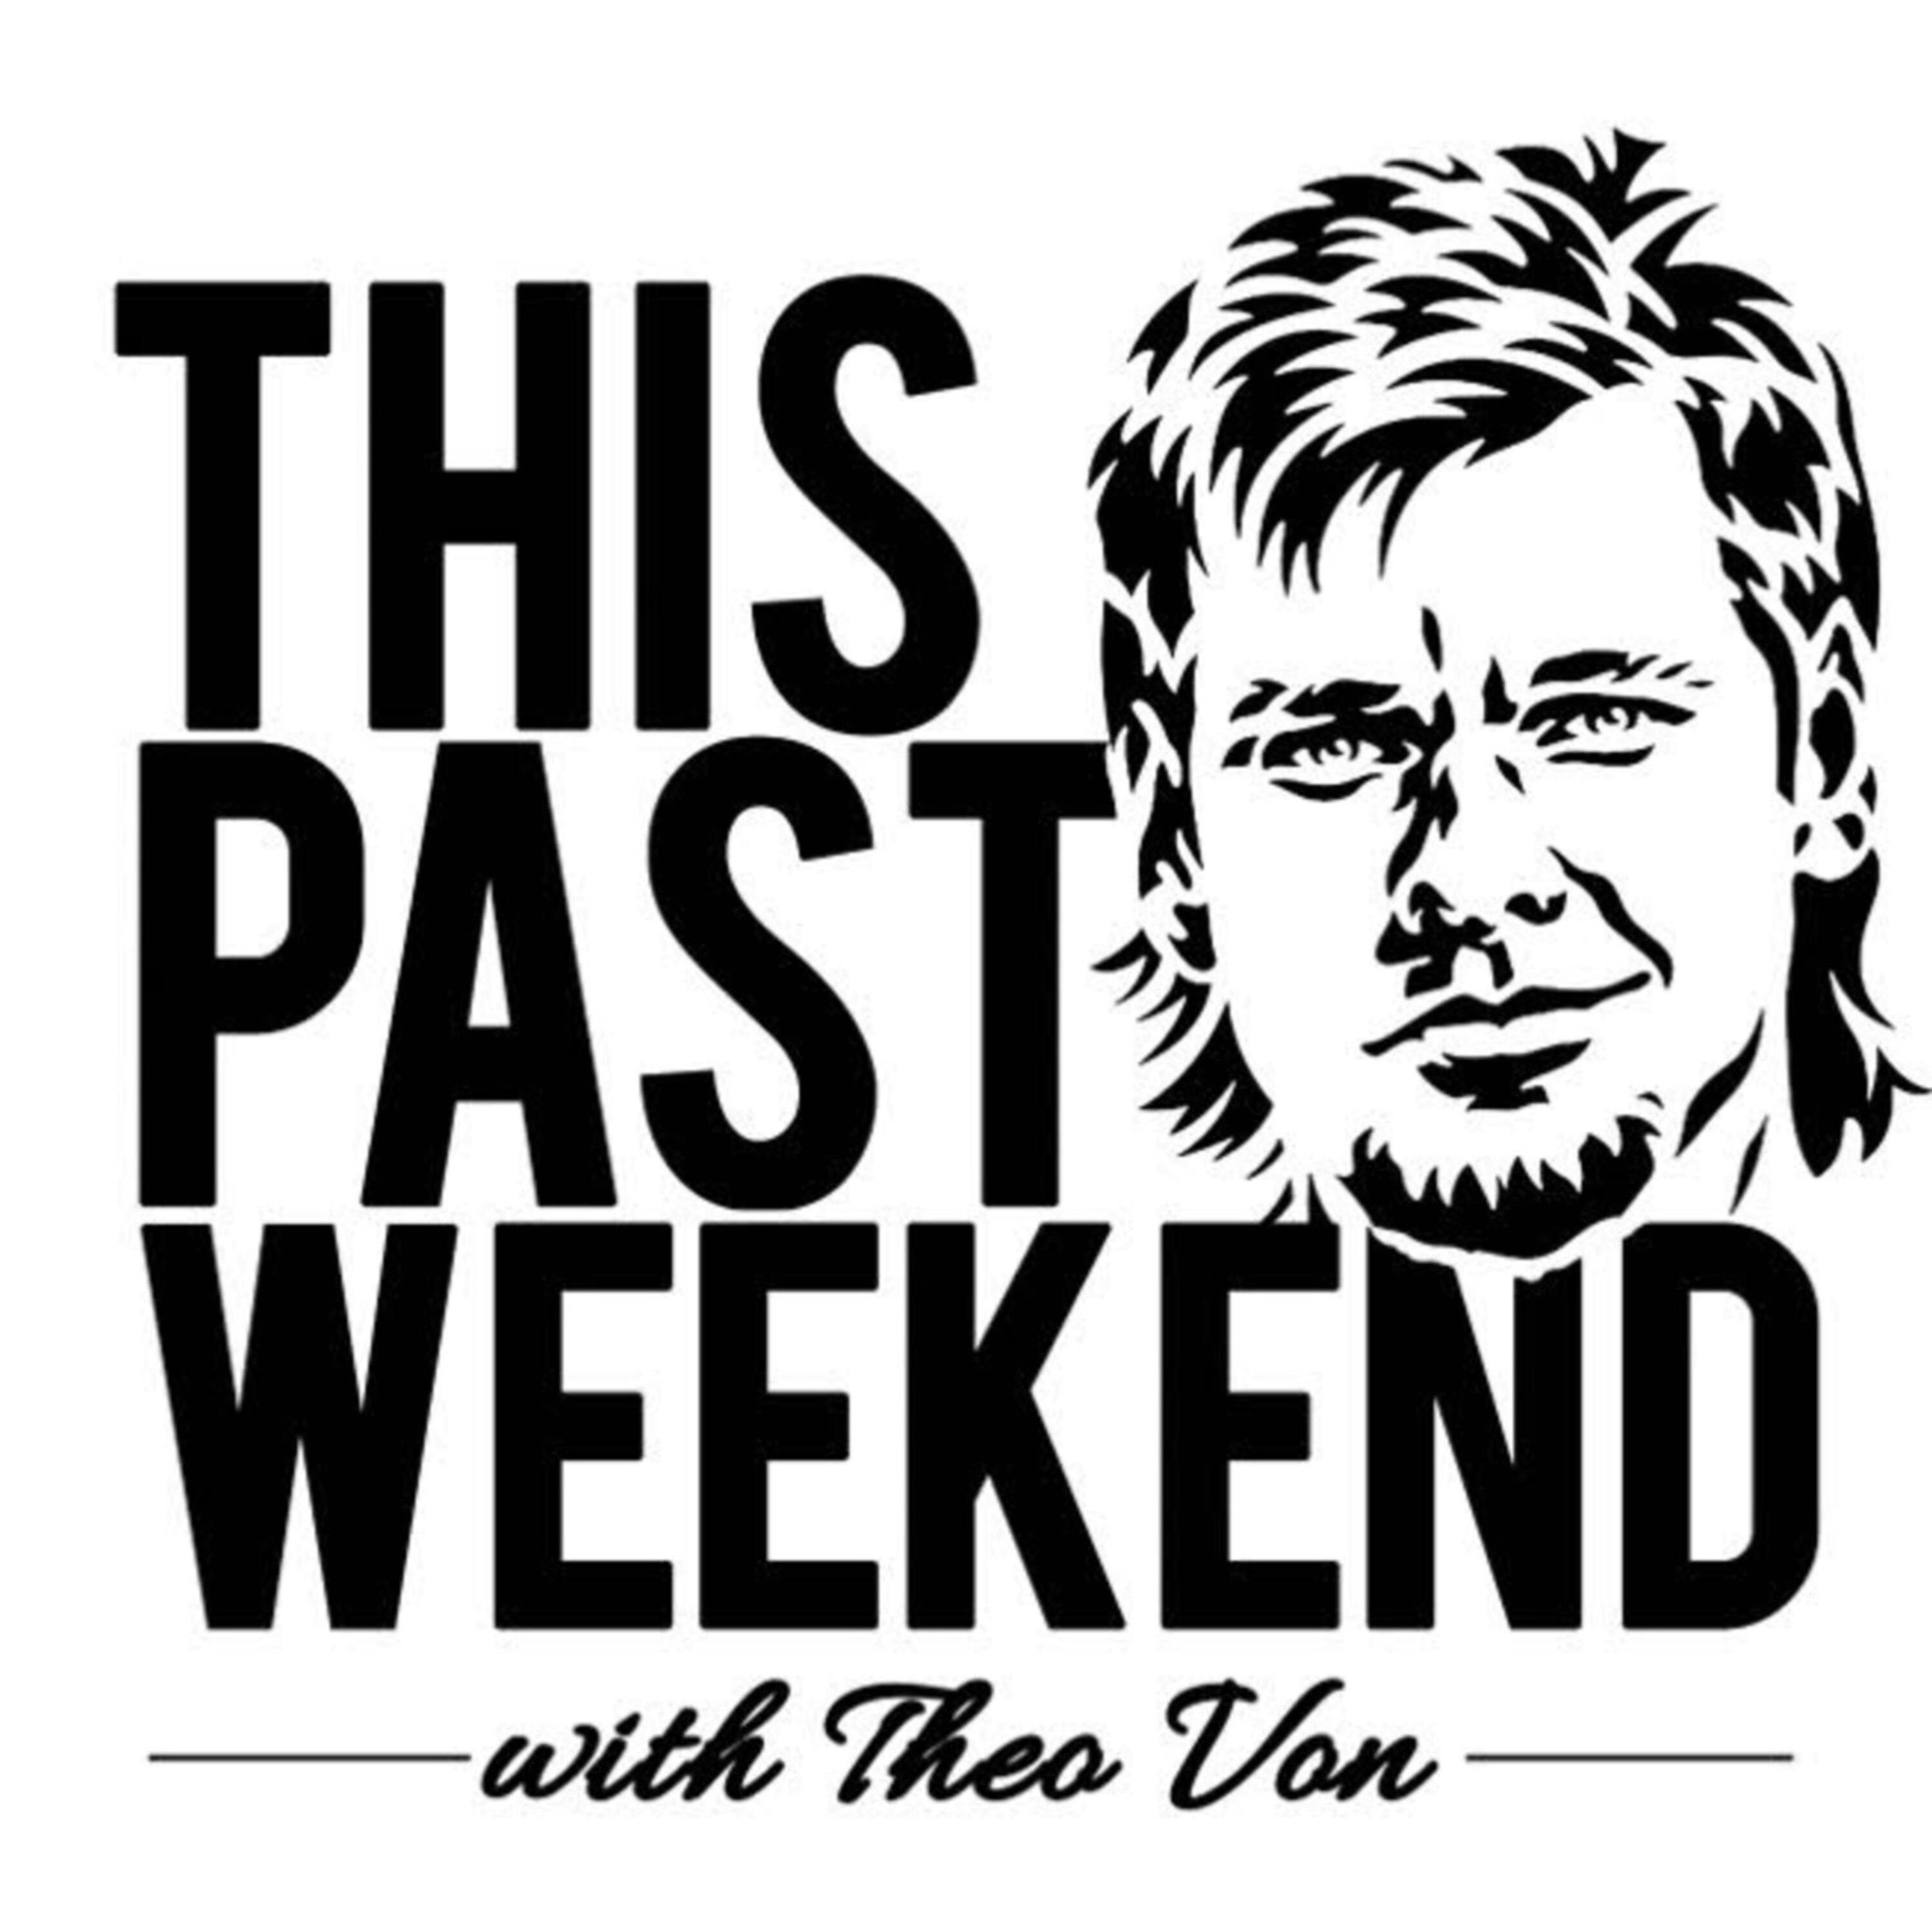 Blind Person Tanja Milojevic | This Past Weekend #215 by Theo Von